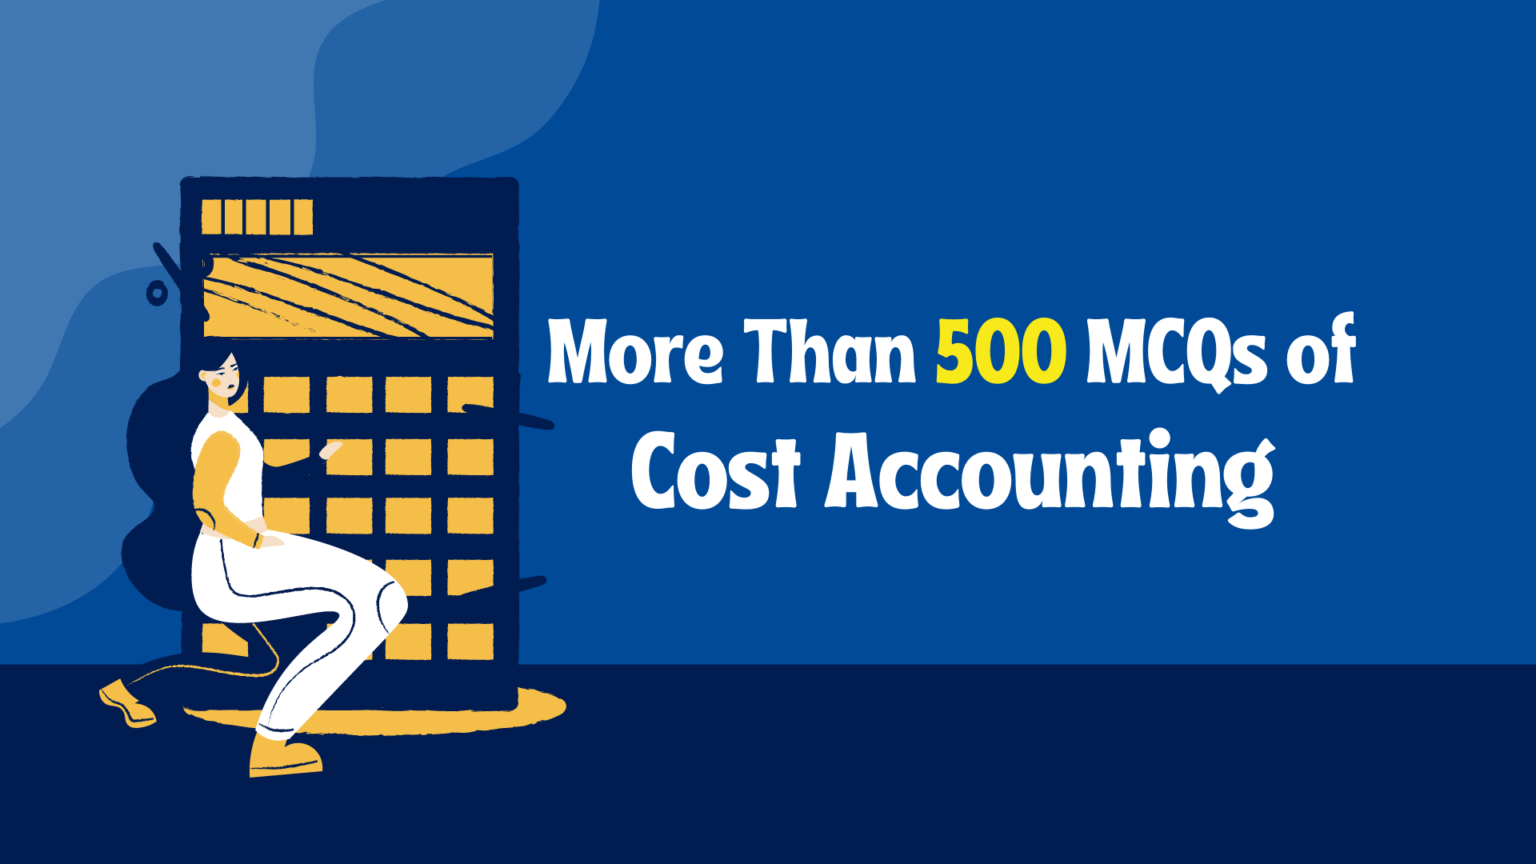 cost-accounting-mcq-with-answer-more-than-500-mcqs-for-free-scholarszilla